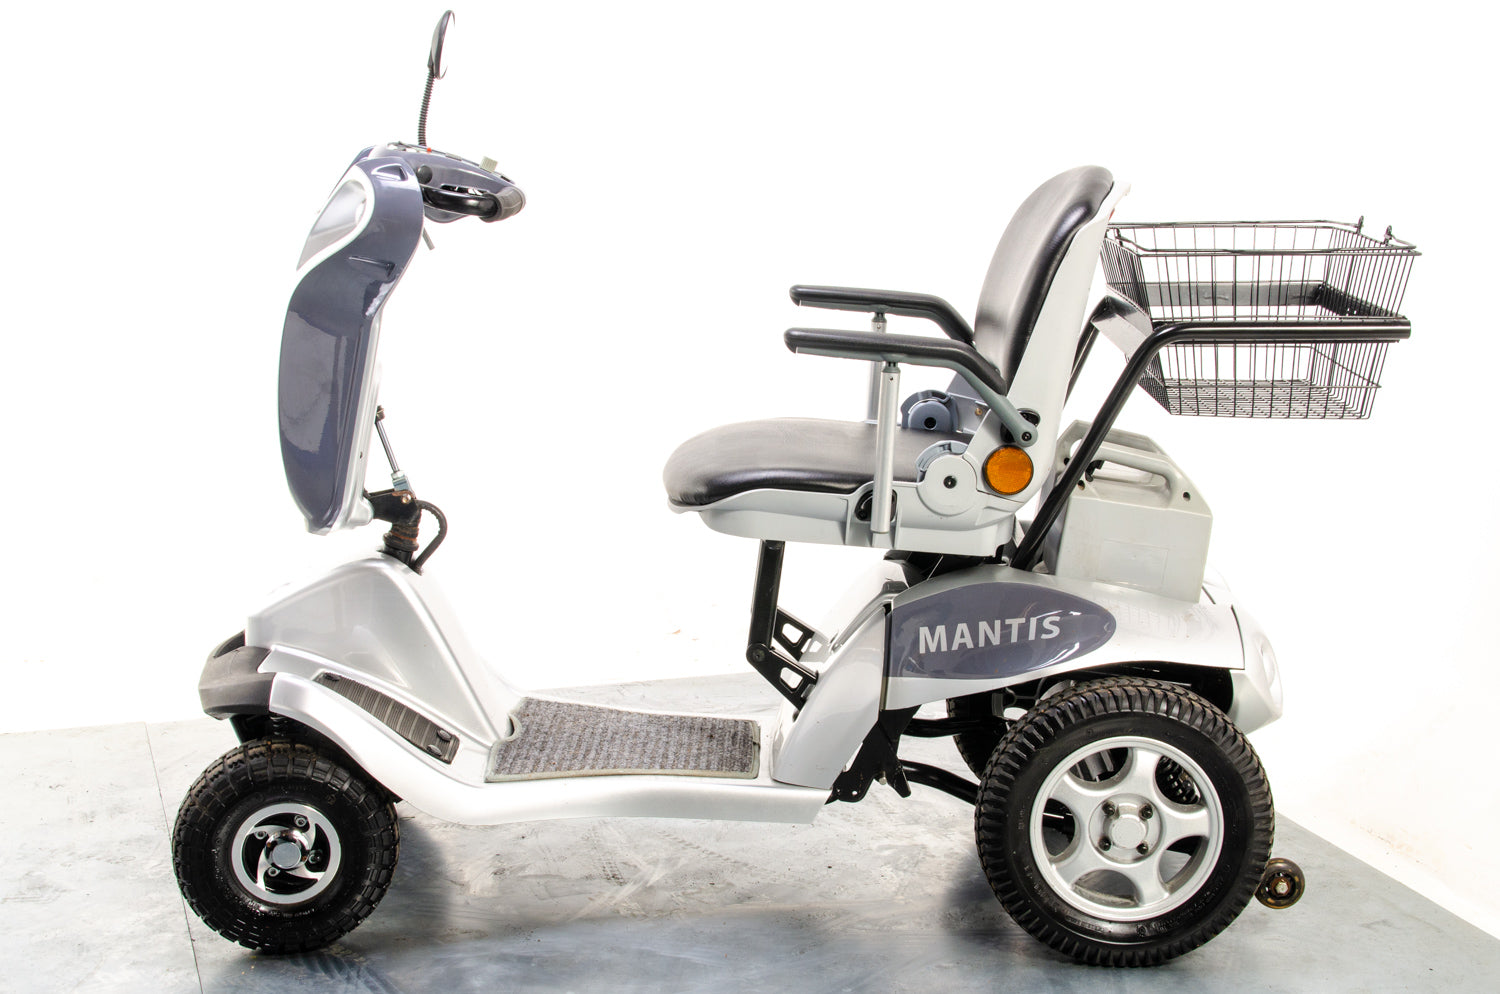 Monarch Mantis Used Mobility Scooter 8mph Large Comfy Class 3 Road Legal Transportable Folding